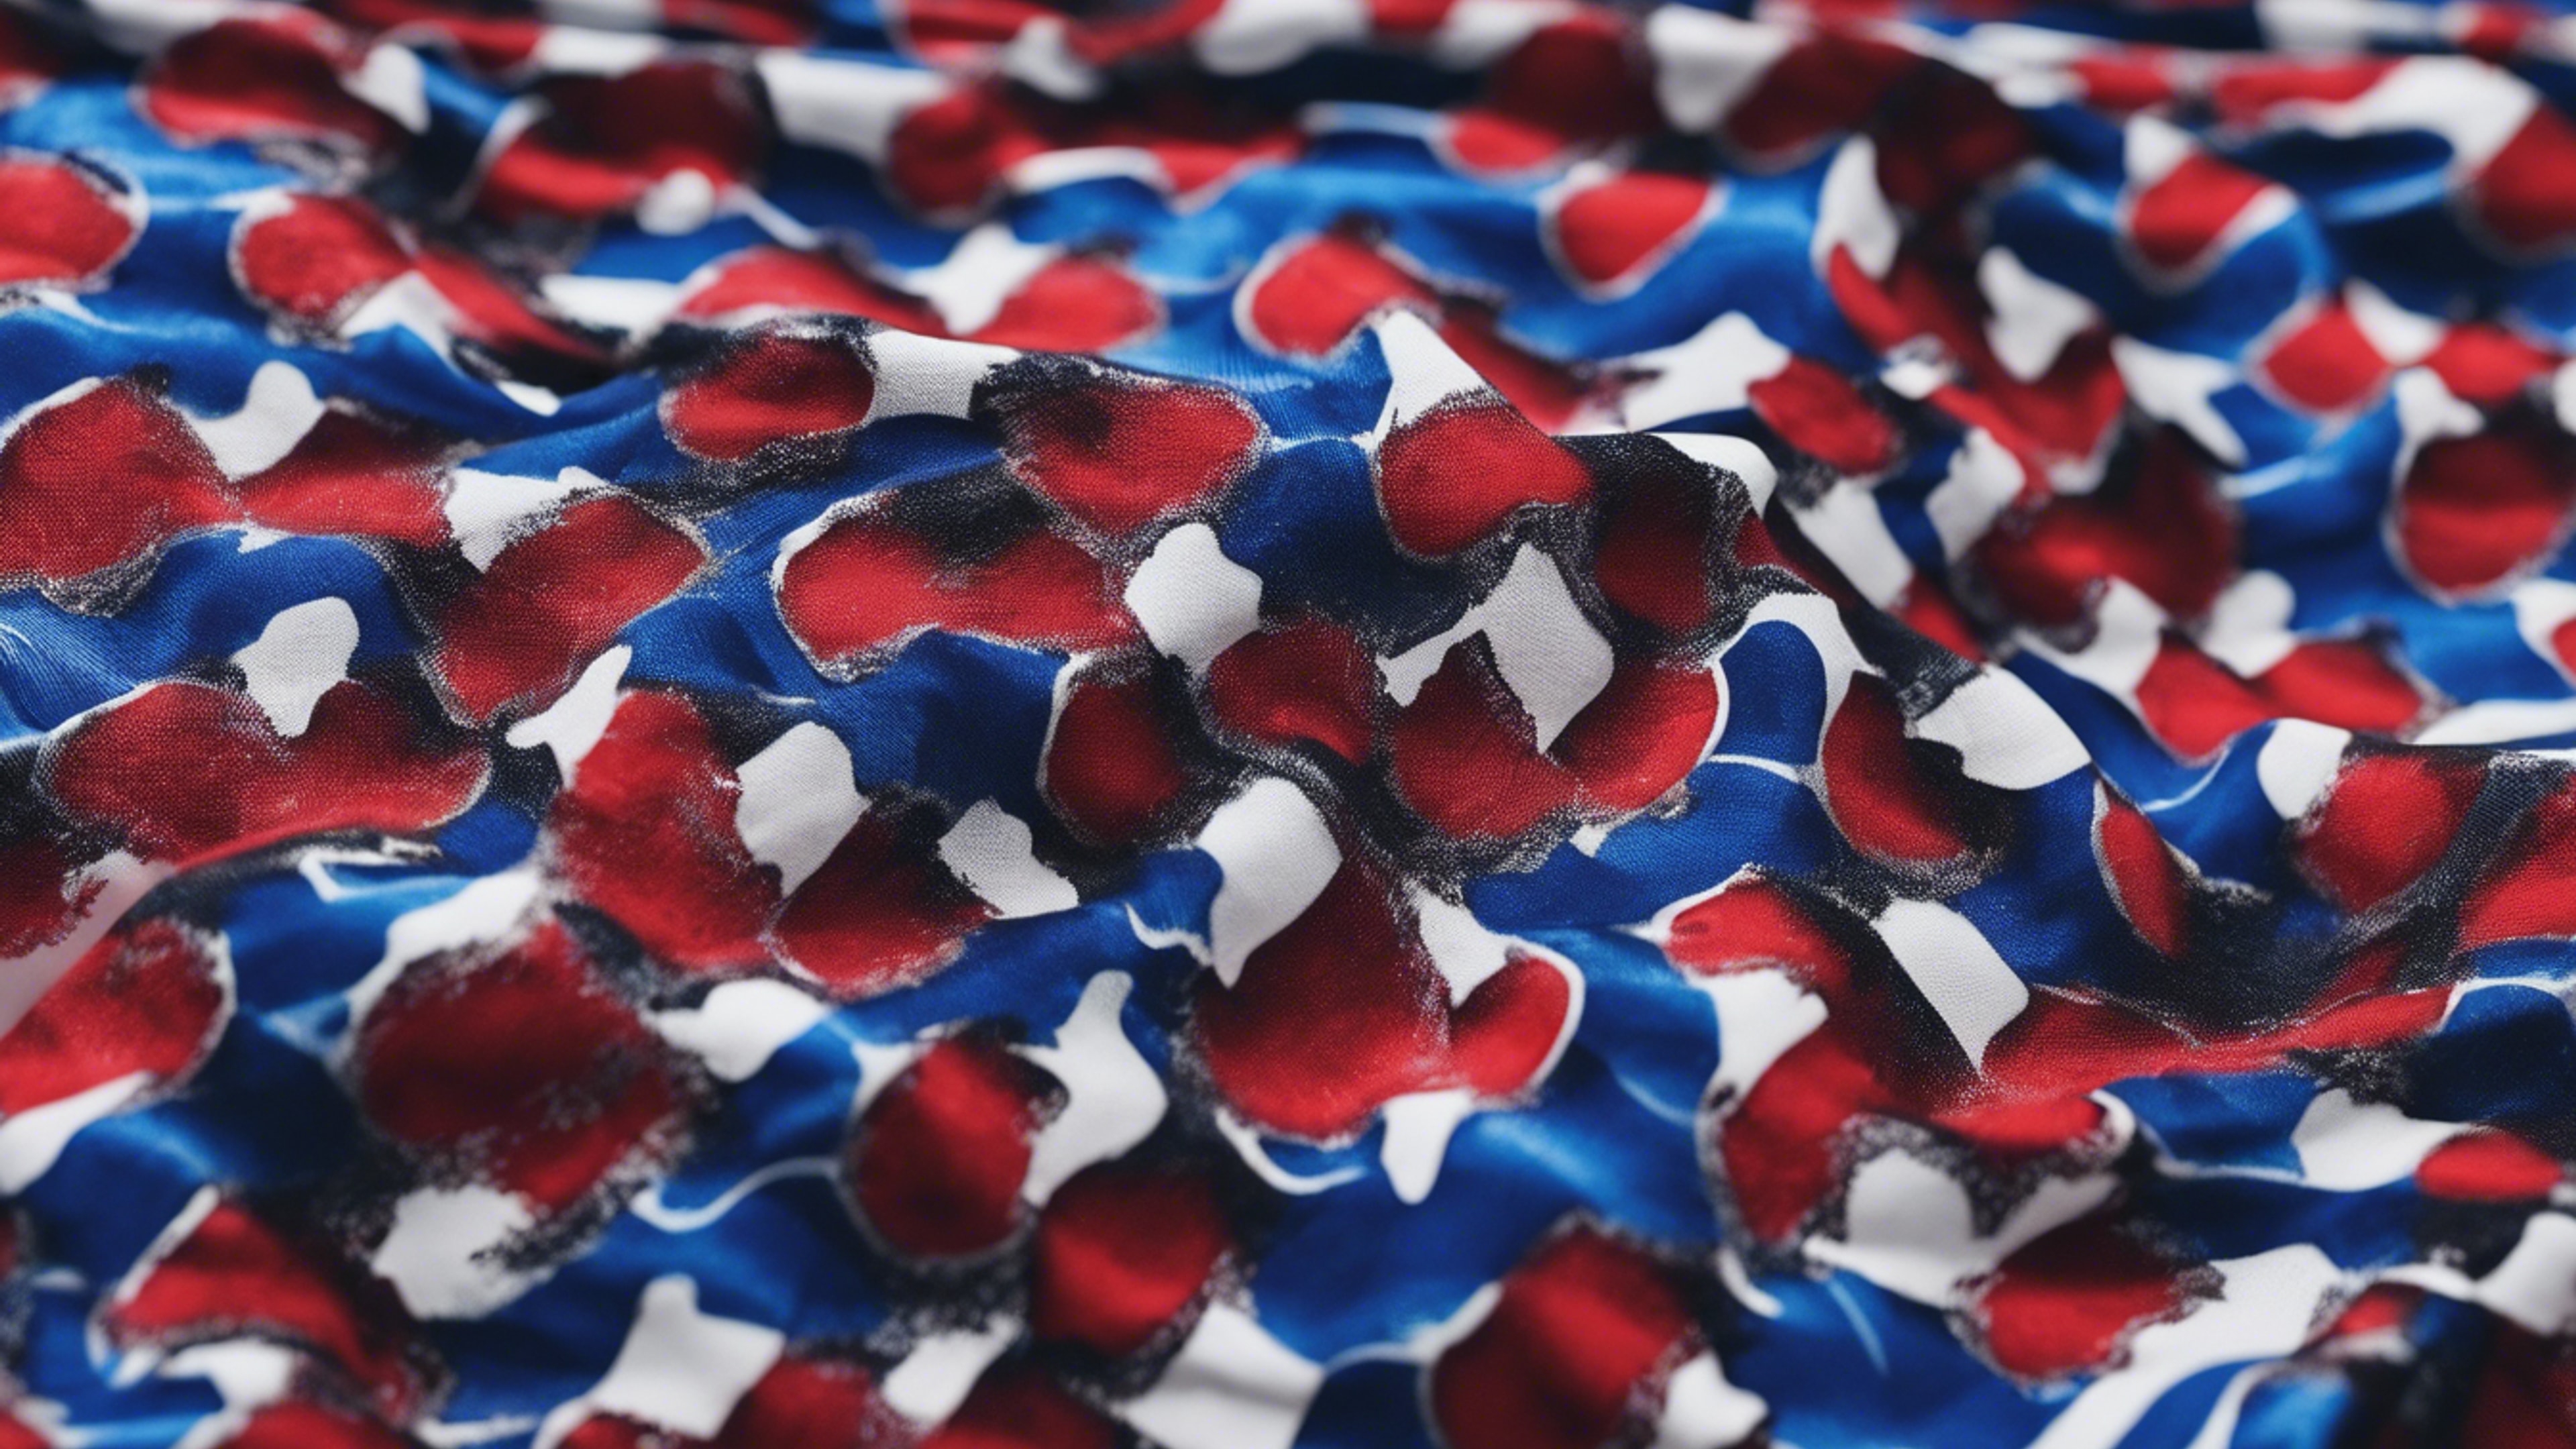 A pattern of a jacket using red and blue camo. 벽지[dc85284079f94842886c]